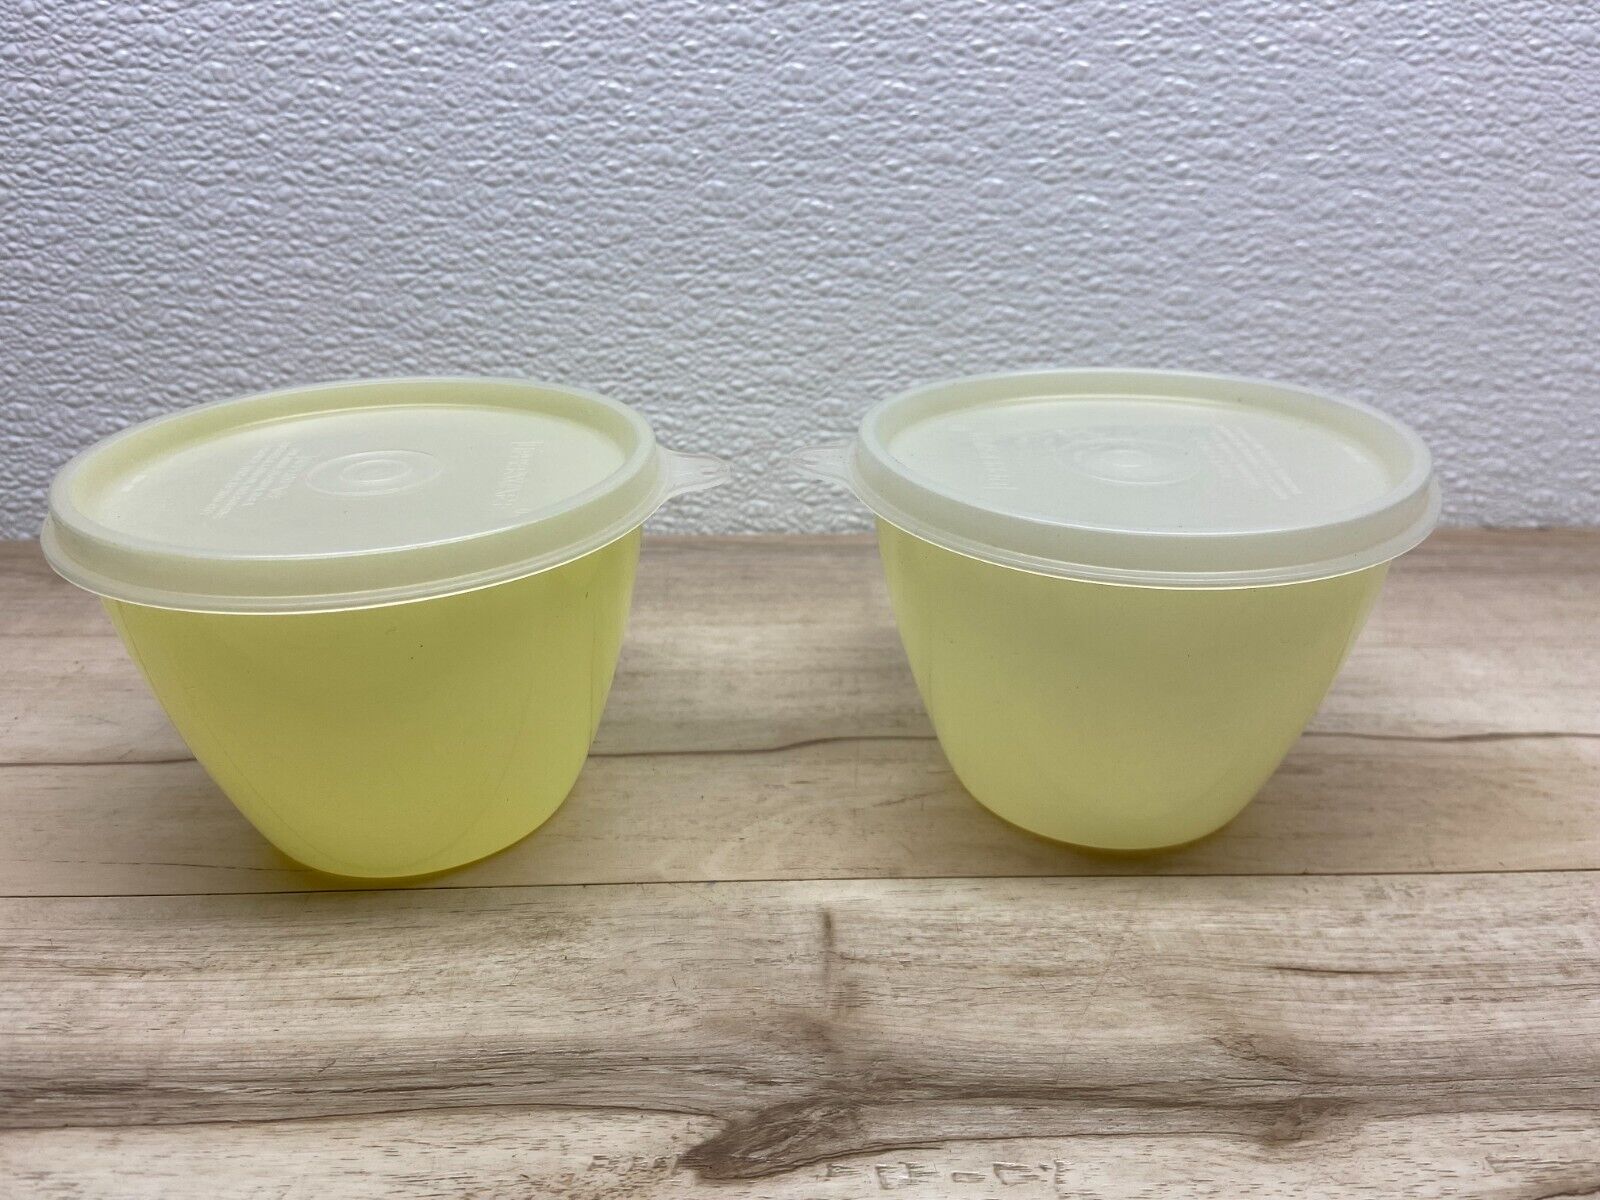 Vtg Tupperware Yellow Round Bawls # 148 Set Of 2 With Clear Lids